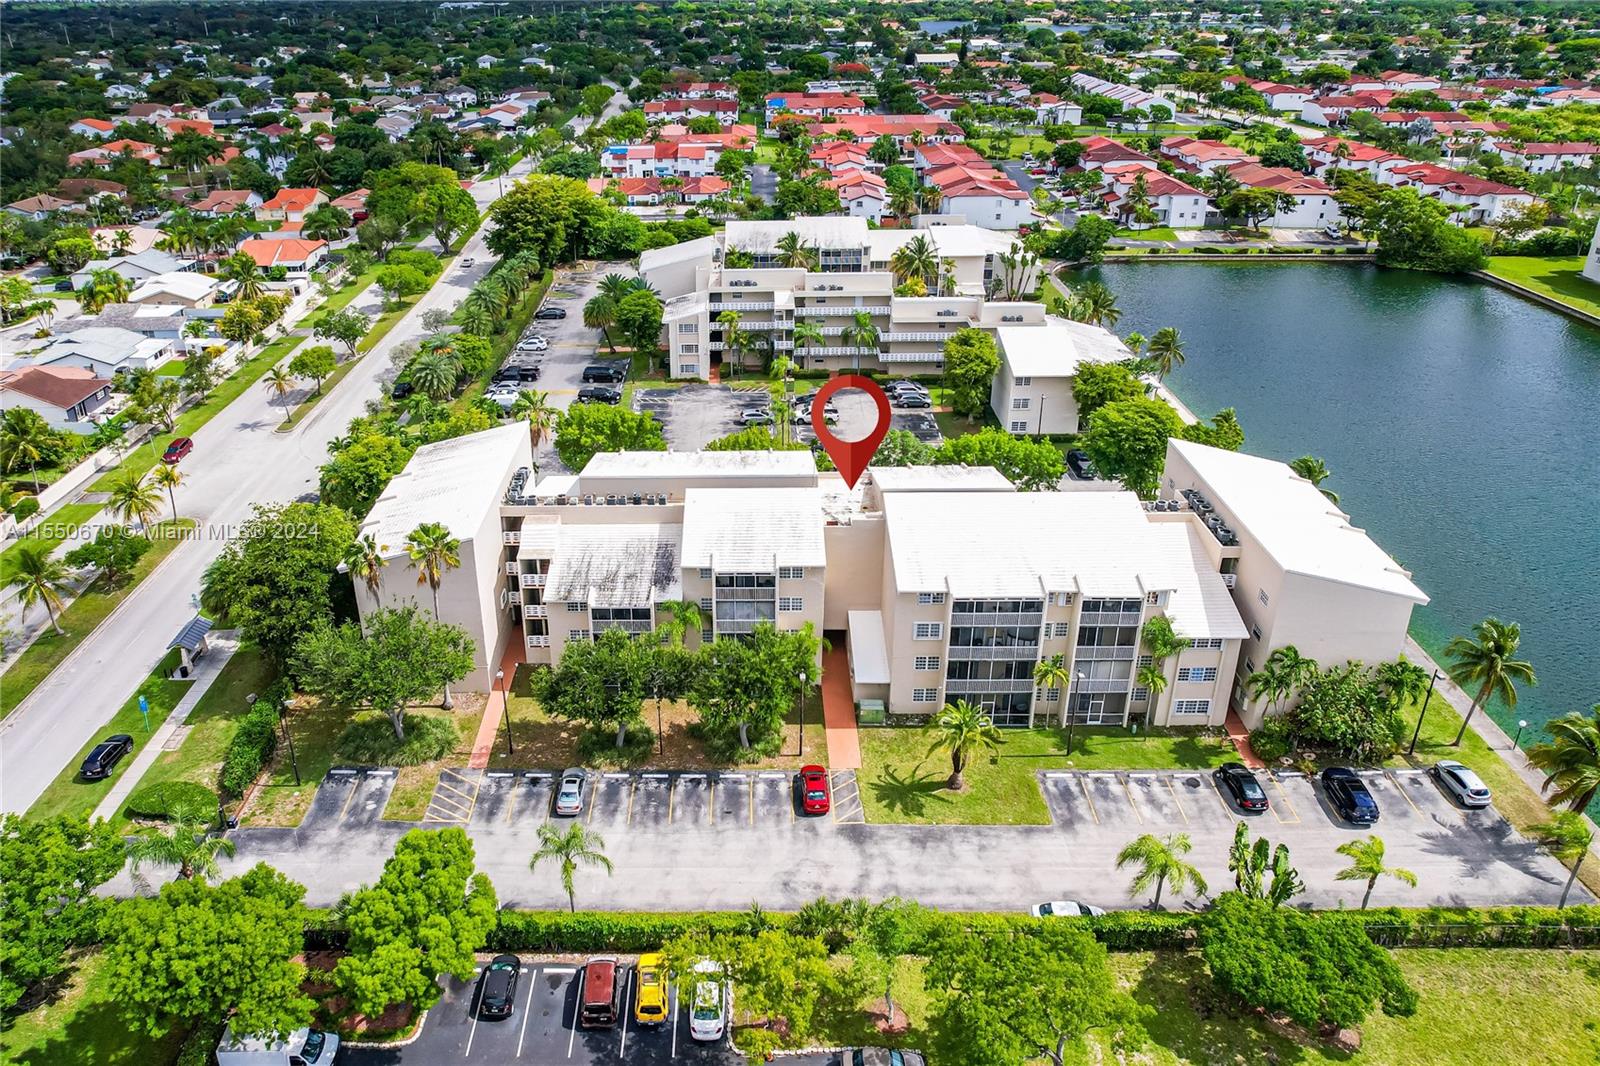 Welcome home with the Gomez Group to this beautifully appointed 2-bedroom, 2-bathroom apartment in the heart of Cutler Bay. Situated on the first floor, this residence offers convenience and style. The upgraded kitchen features modern appliances and plenty of storage space, while the bathrooms boast elegant vanities. Added conveniences include a washer and dryer. Enjoy breathtaking views of the serene lake from your own private patio. Don't miss out on this opportunity to experience luxurious lakeside living!